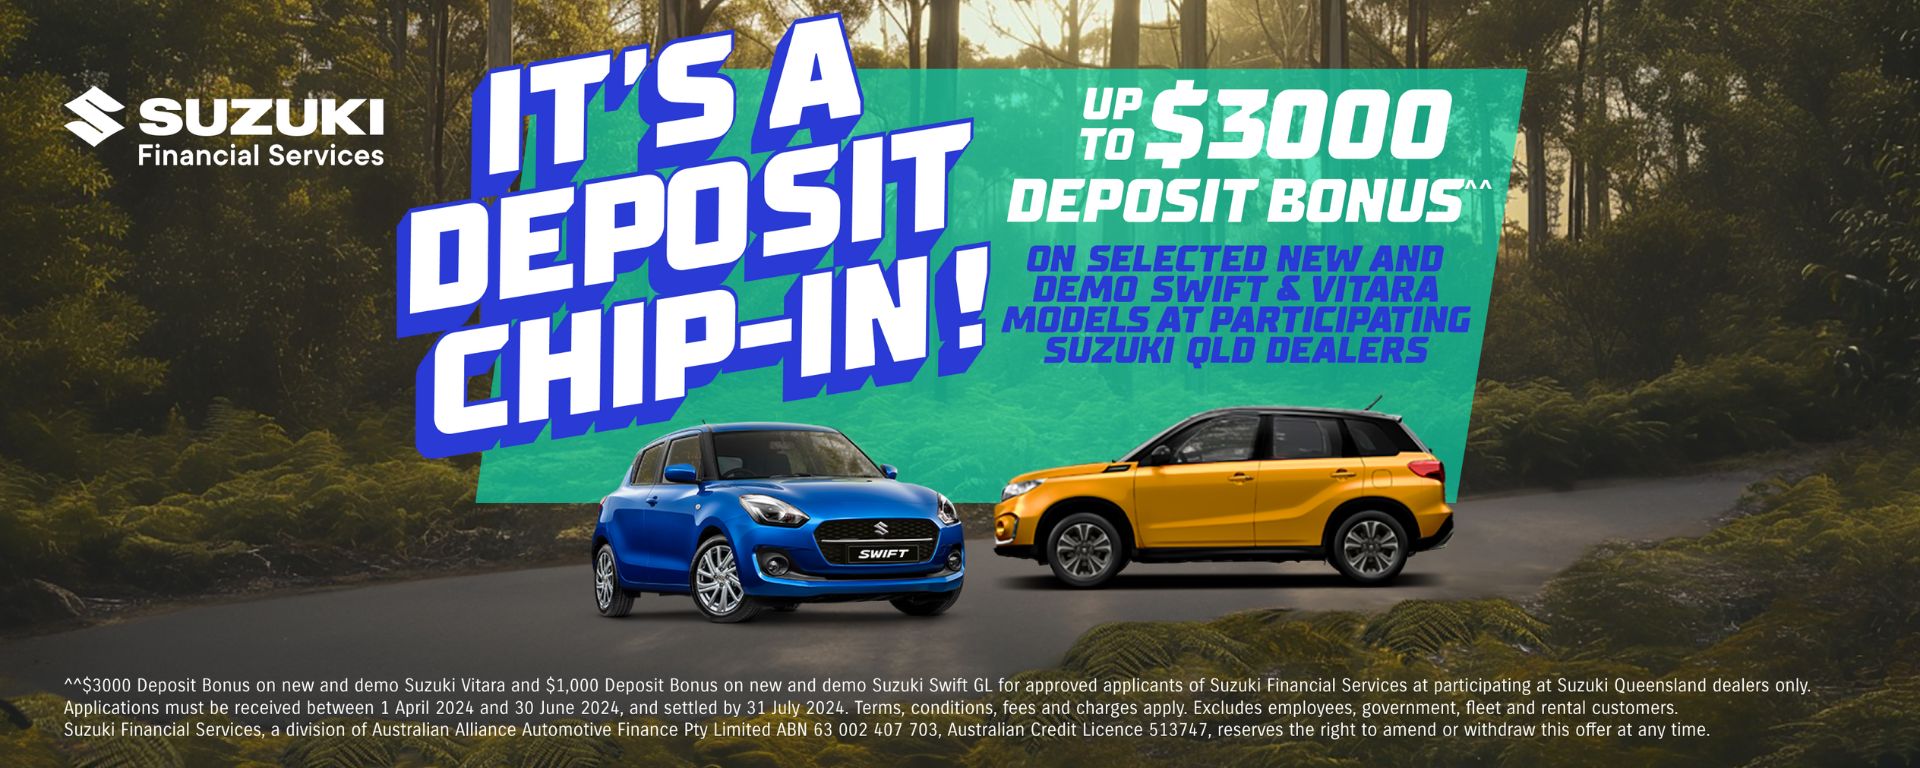 It's a deposit chip in! Up to $3000 deposit bonus on selected Swift and Vitara models. Suzuki financial services.